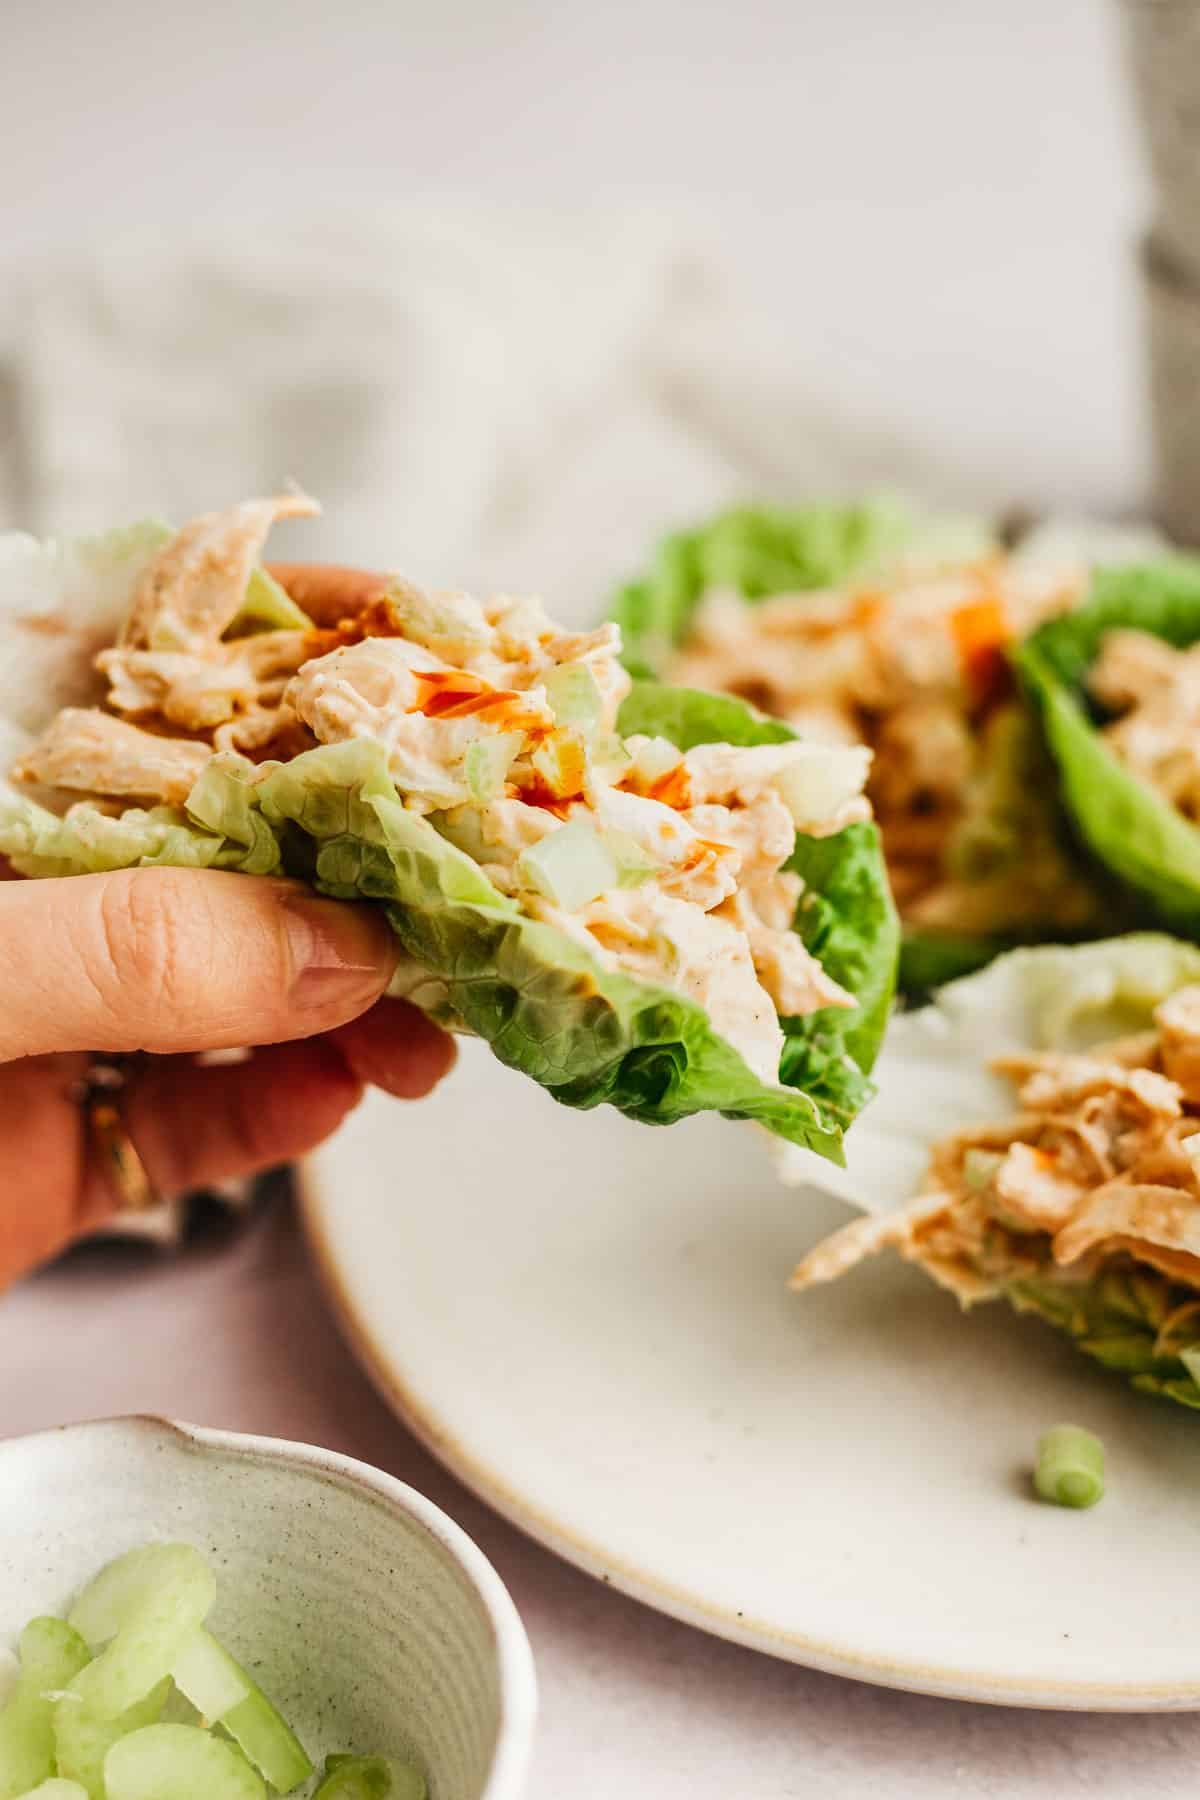 Easy Buffalo Chicken Salad Meal Prep - All the Healthy Things